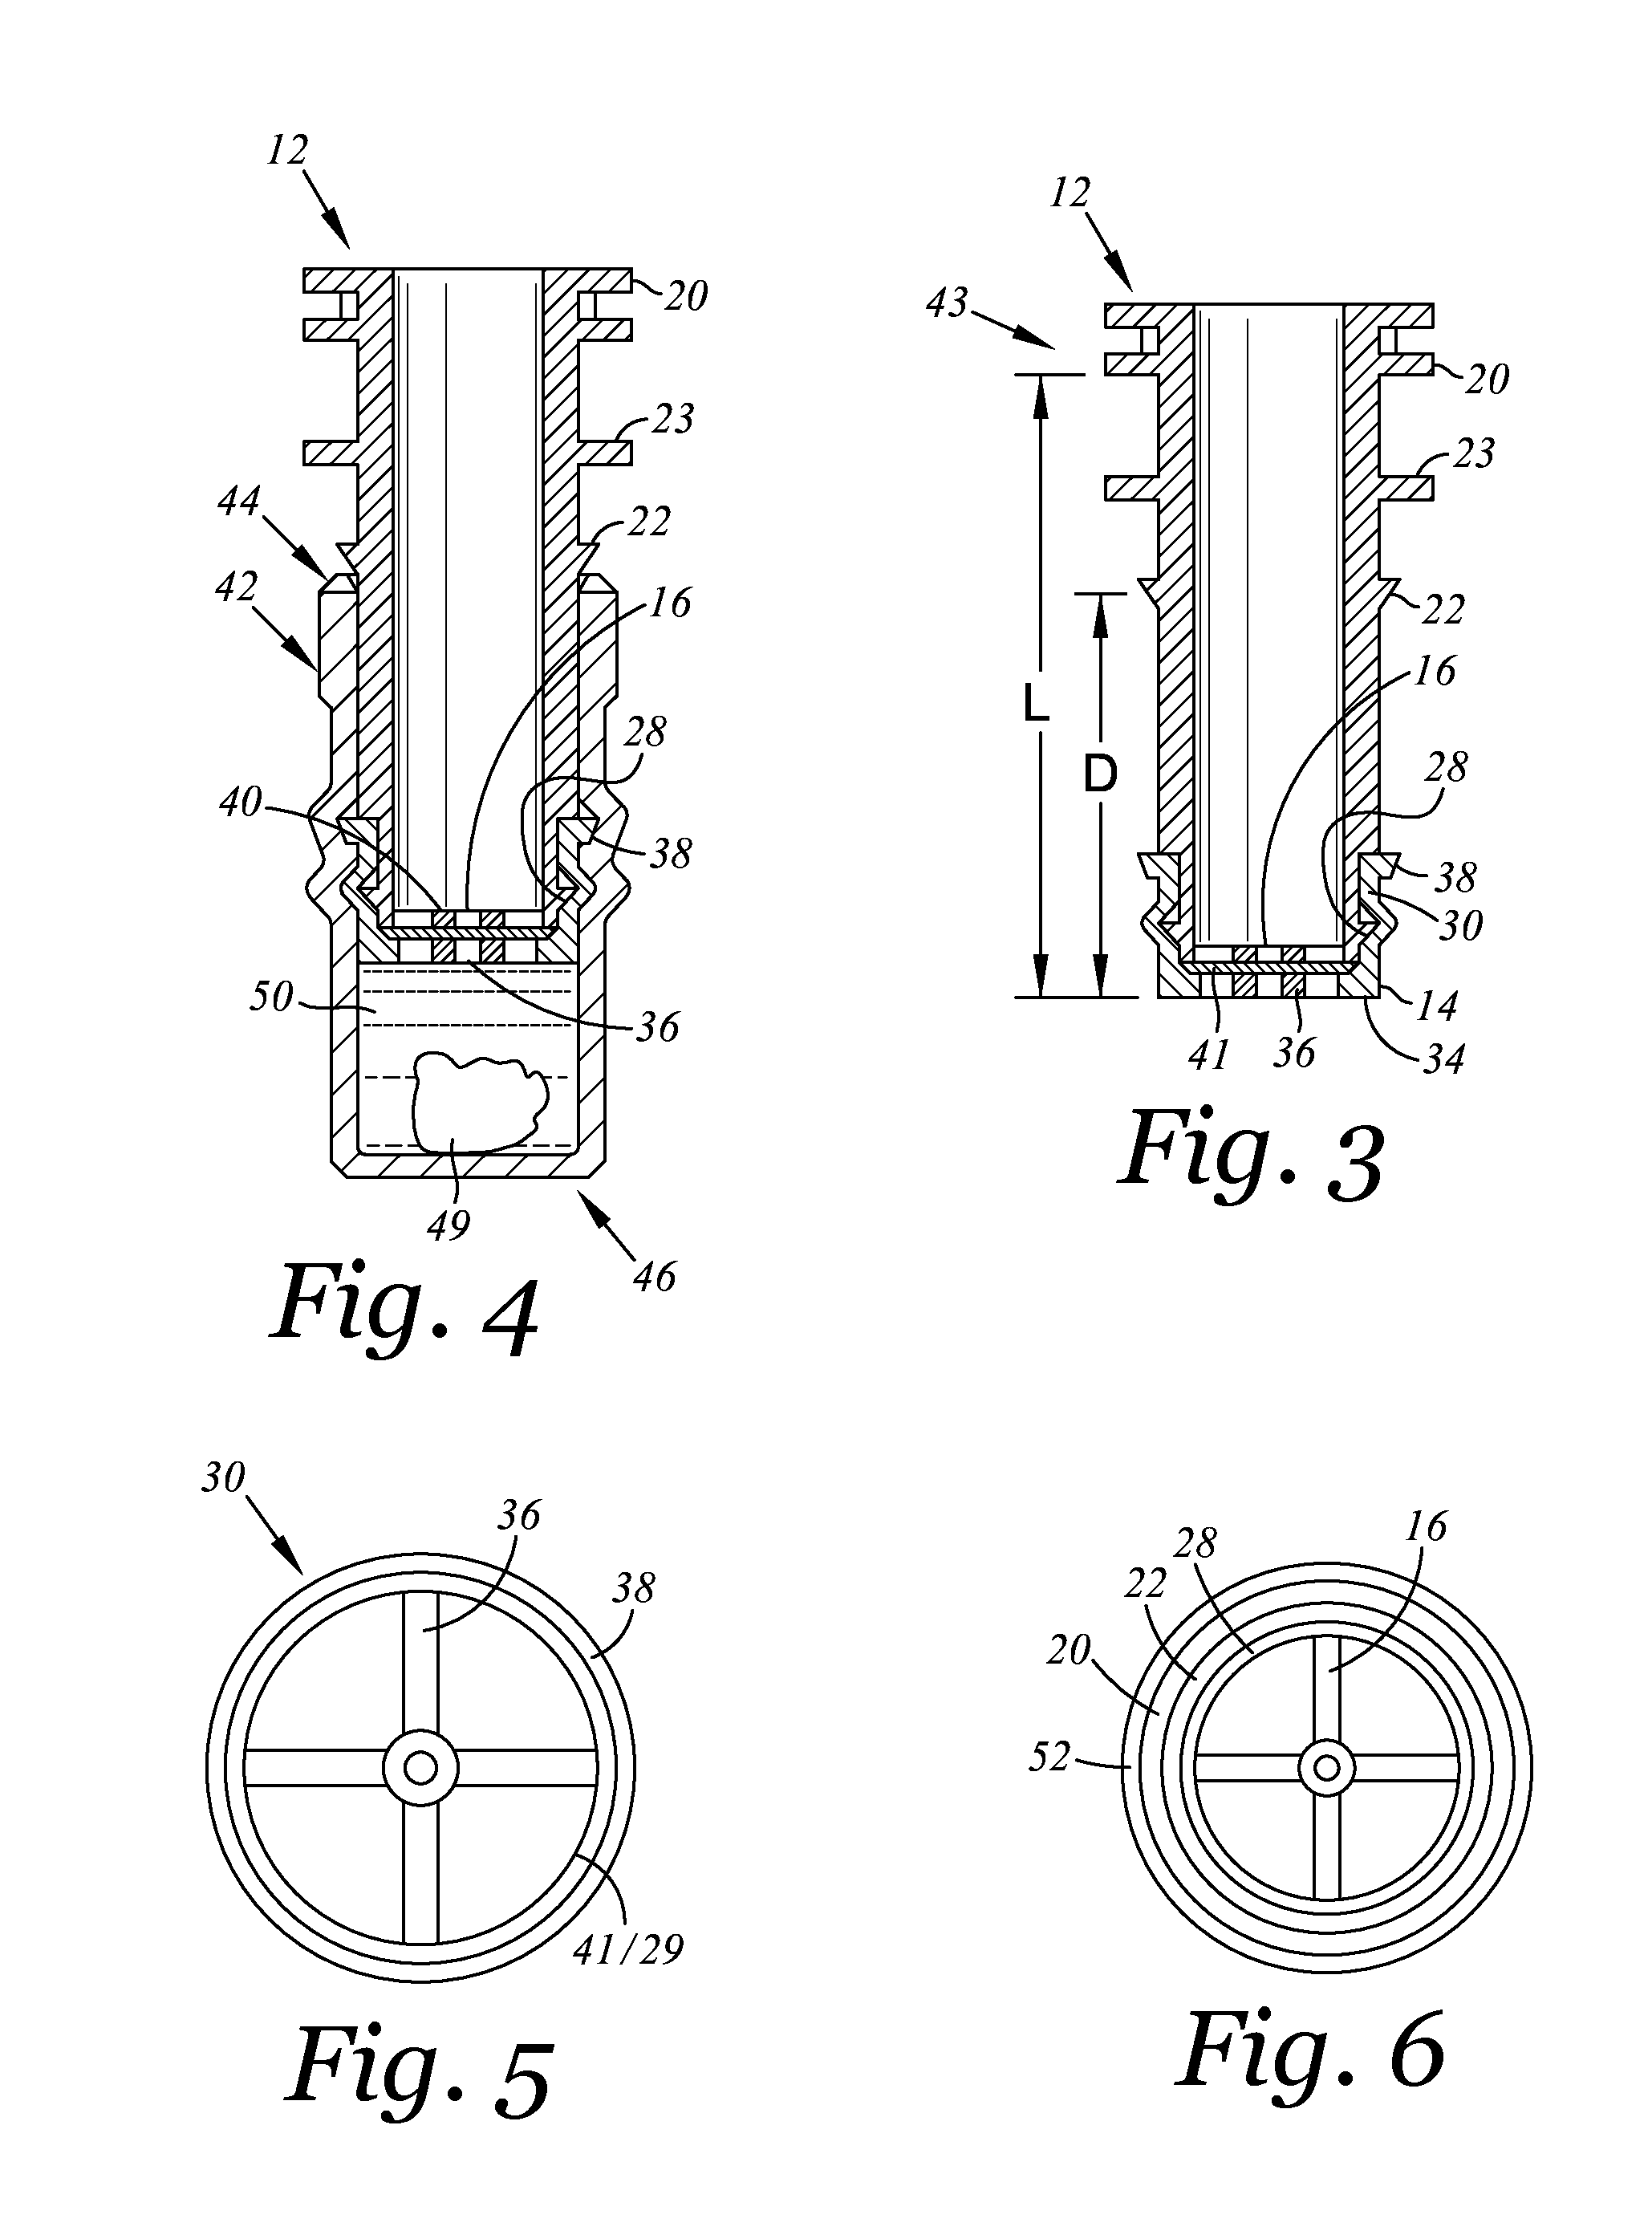 Filter vial with limited piston stroke